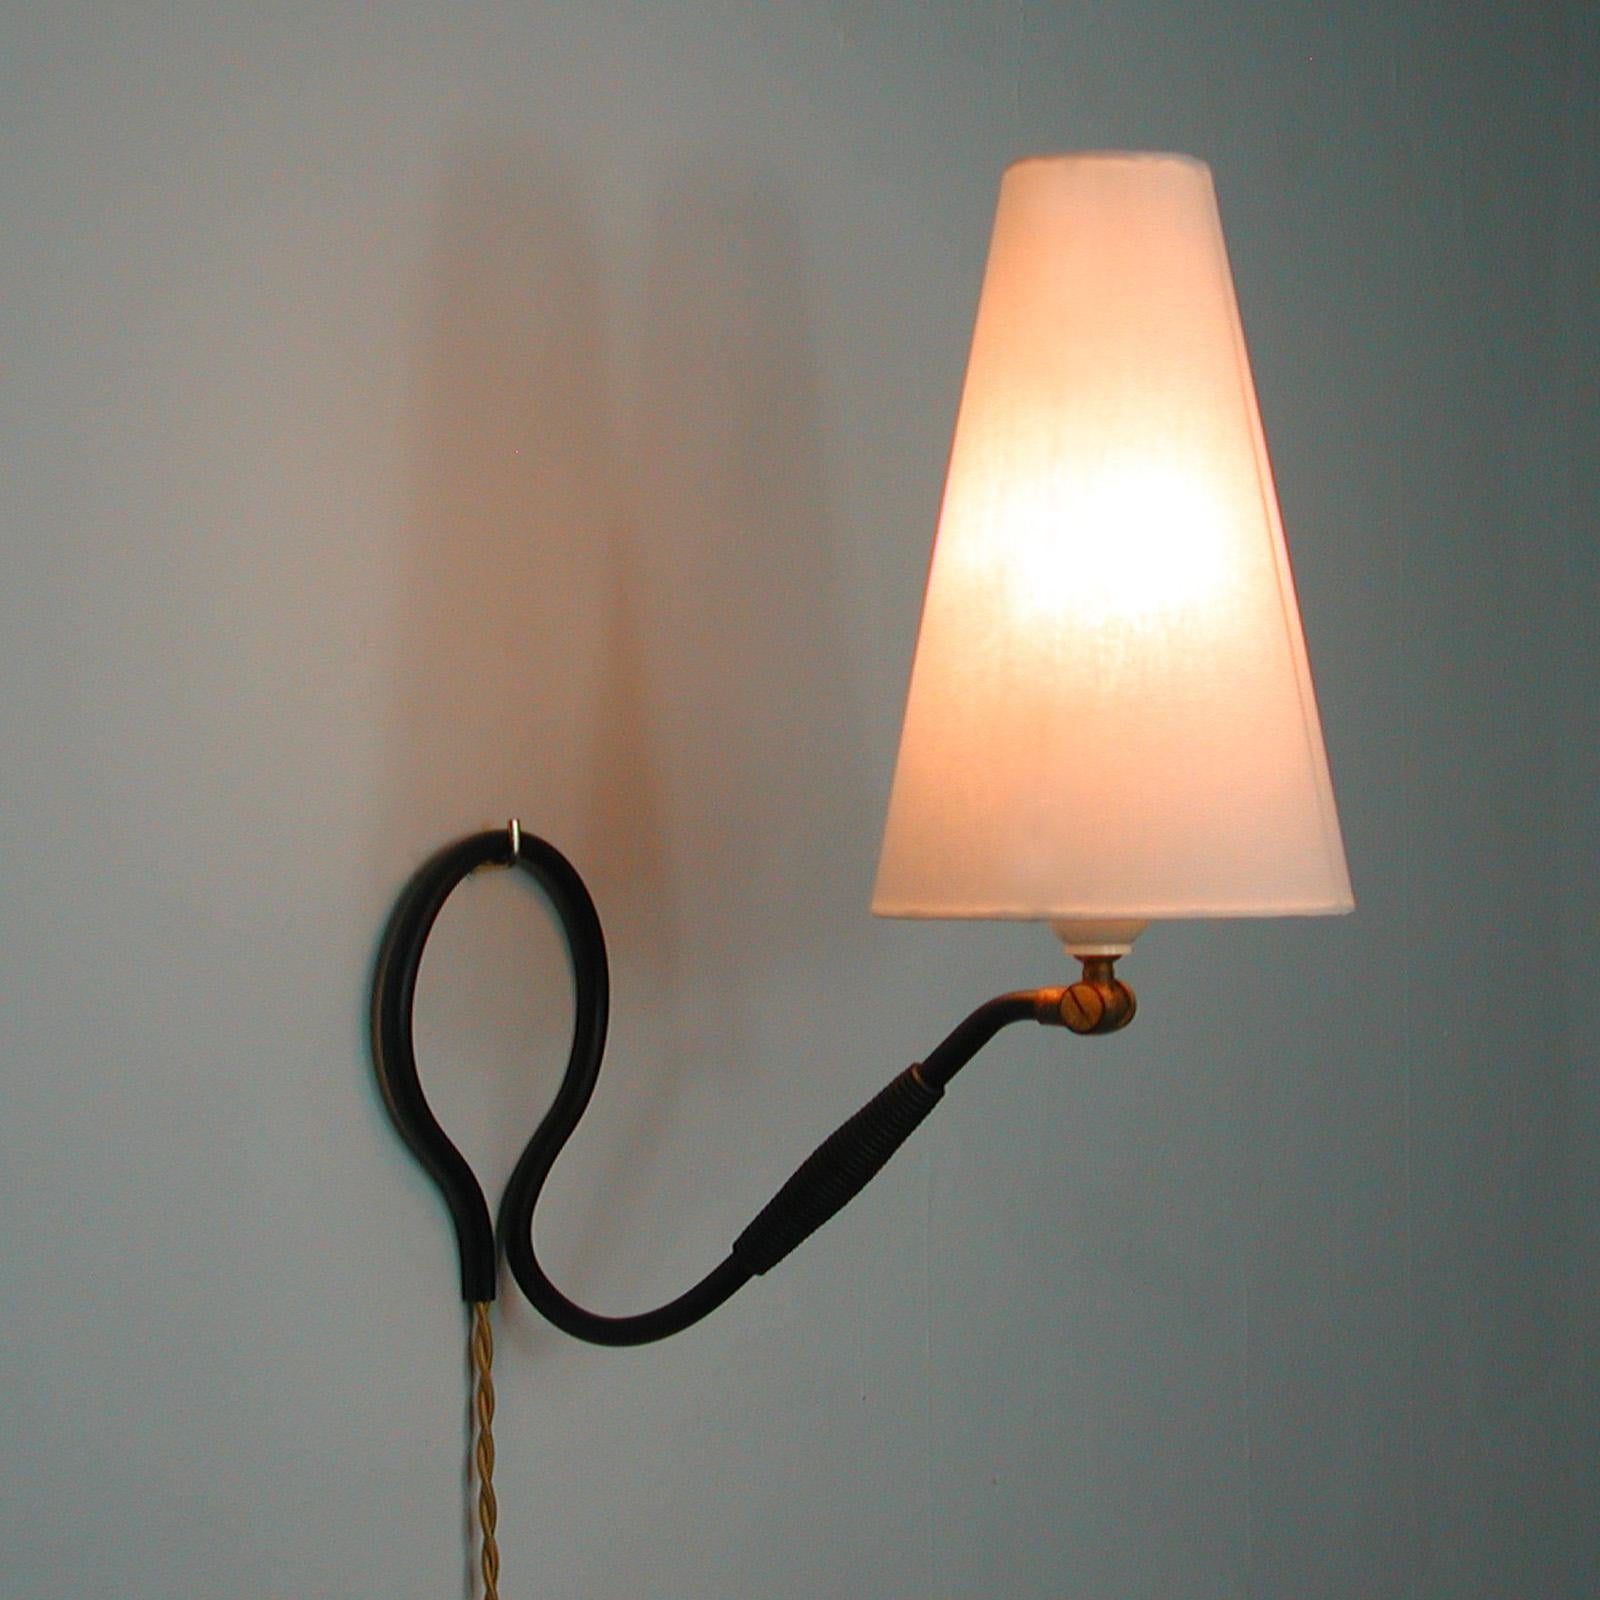 Adjustable Black Brass and Bakelite Wall or Table Lamp 306 by Kaare Klint, 1950s For Sale 12